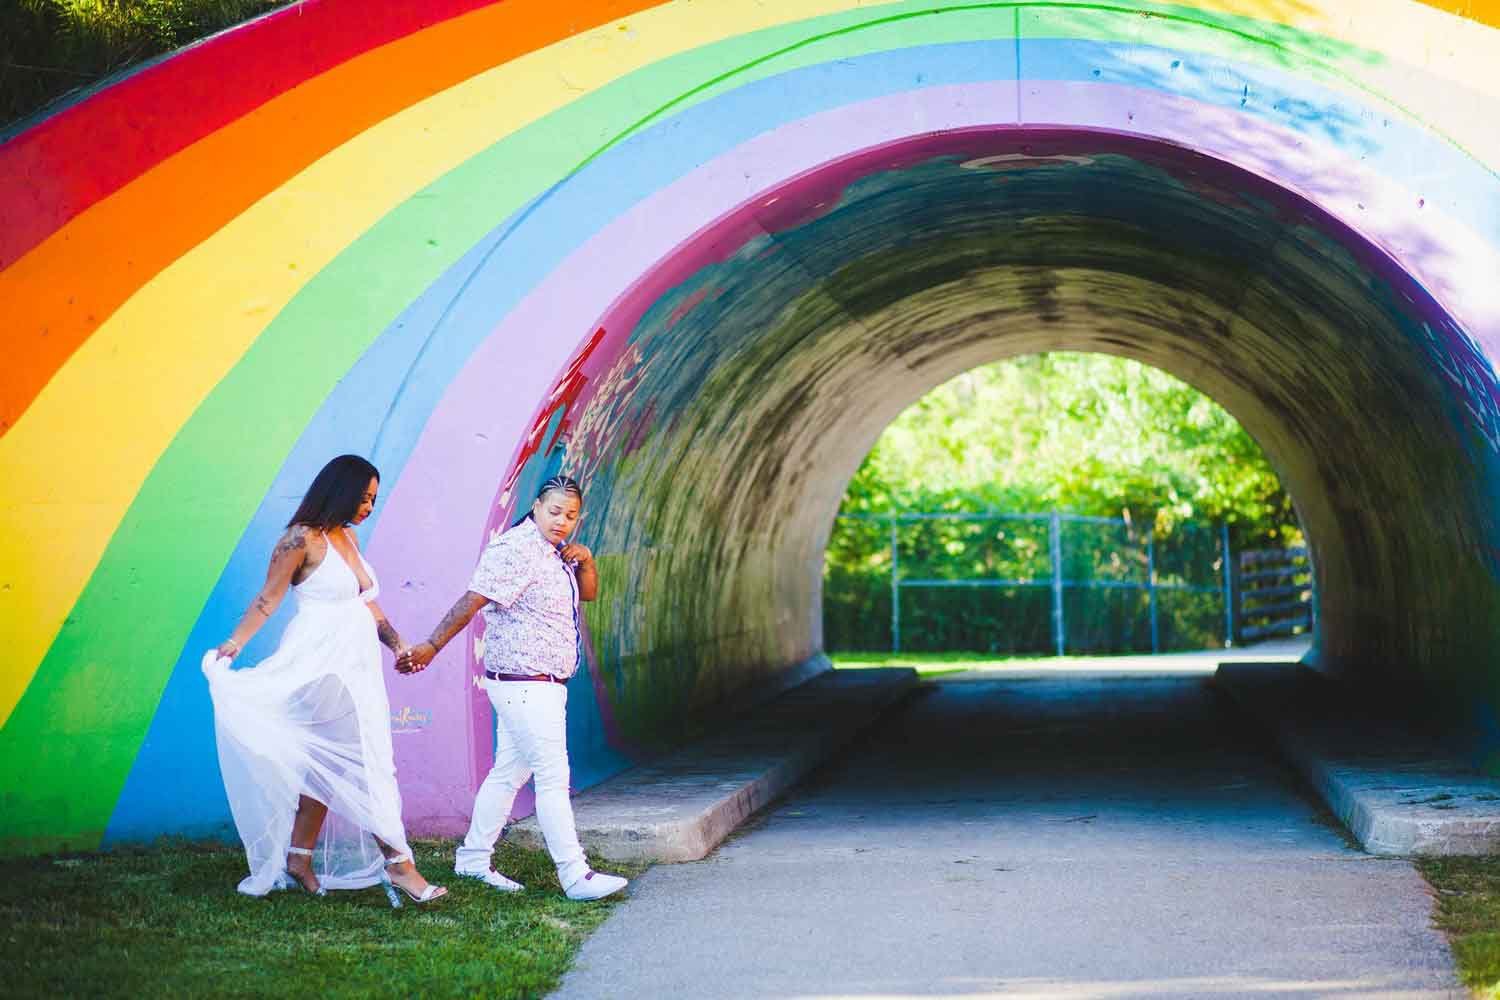 Don Valley Parkway Rainbow Tunnel Engagement Photo Shoot-02.jpg